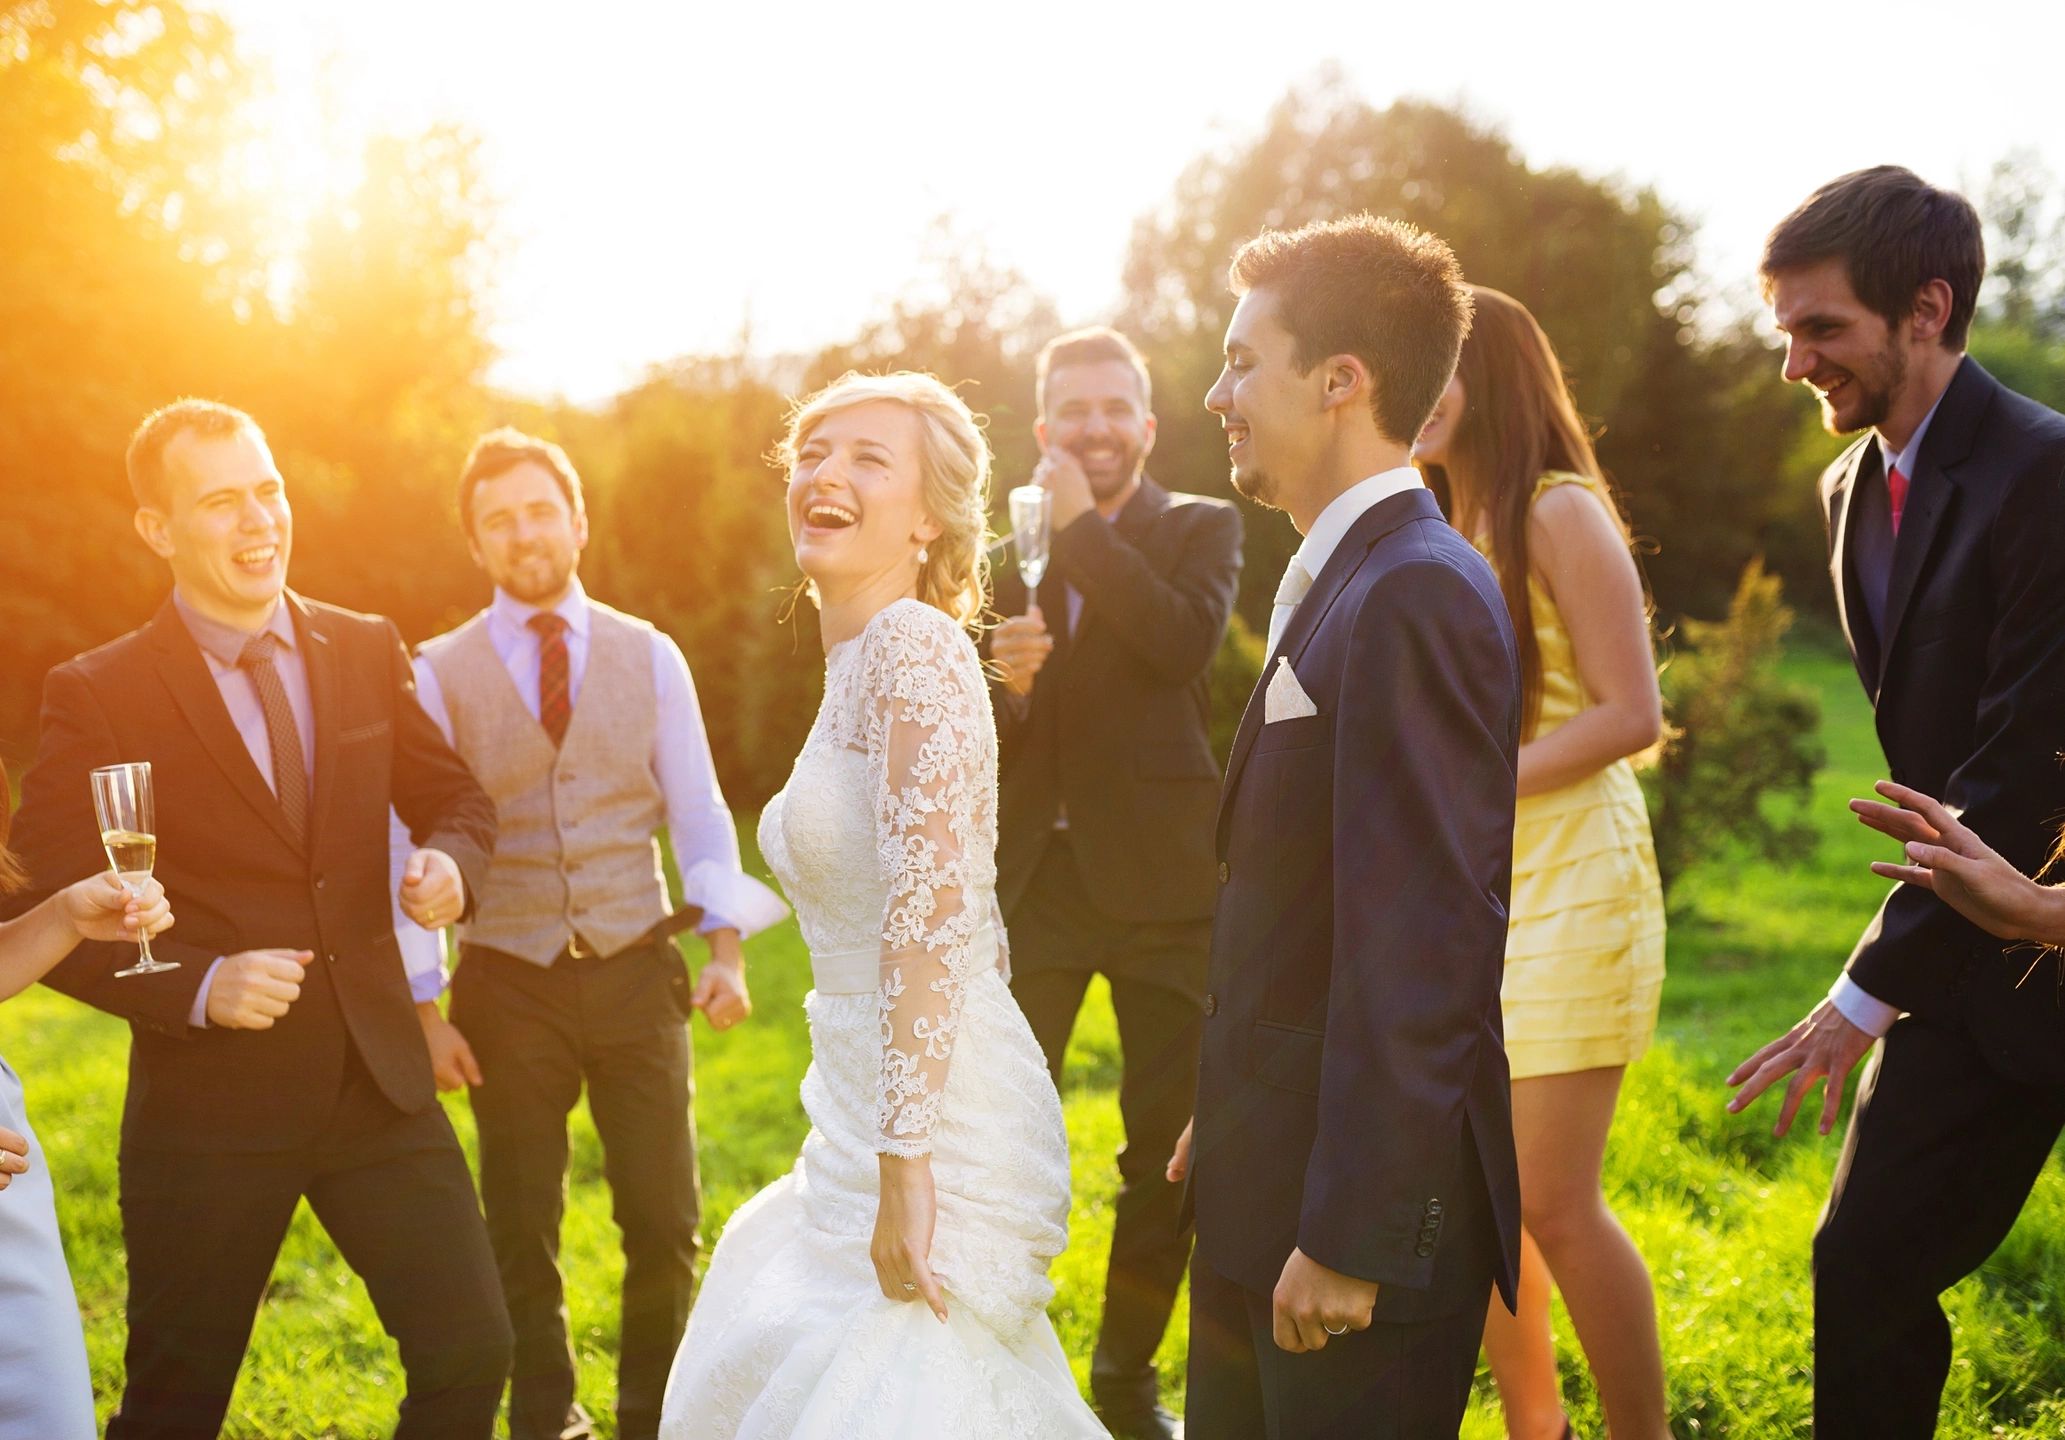 If you plan your wedding reception with these things in mind, it will be fun and memorable.